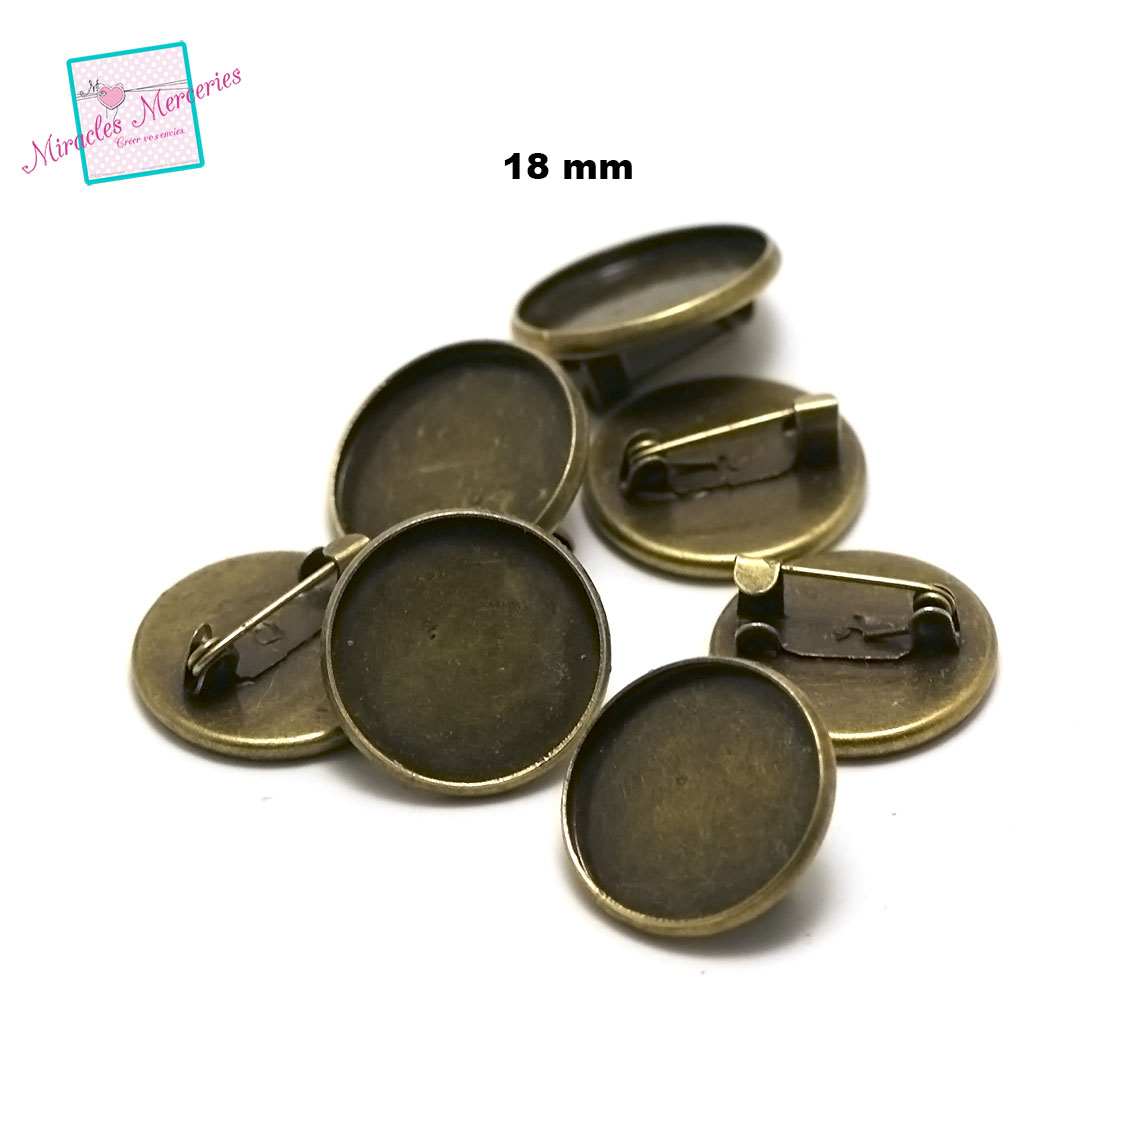 10 broches support cabochon ronde 18 mm,bronze